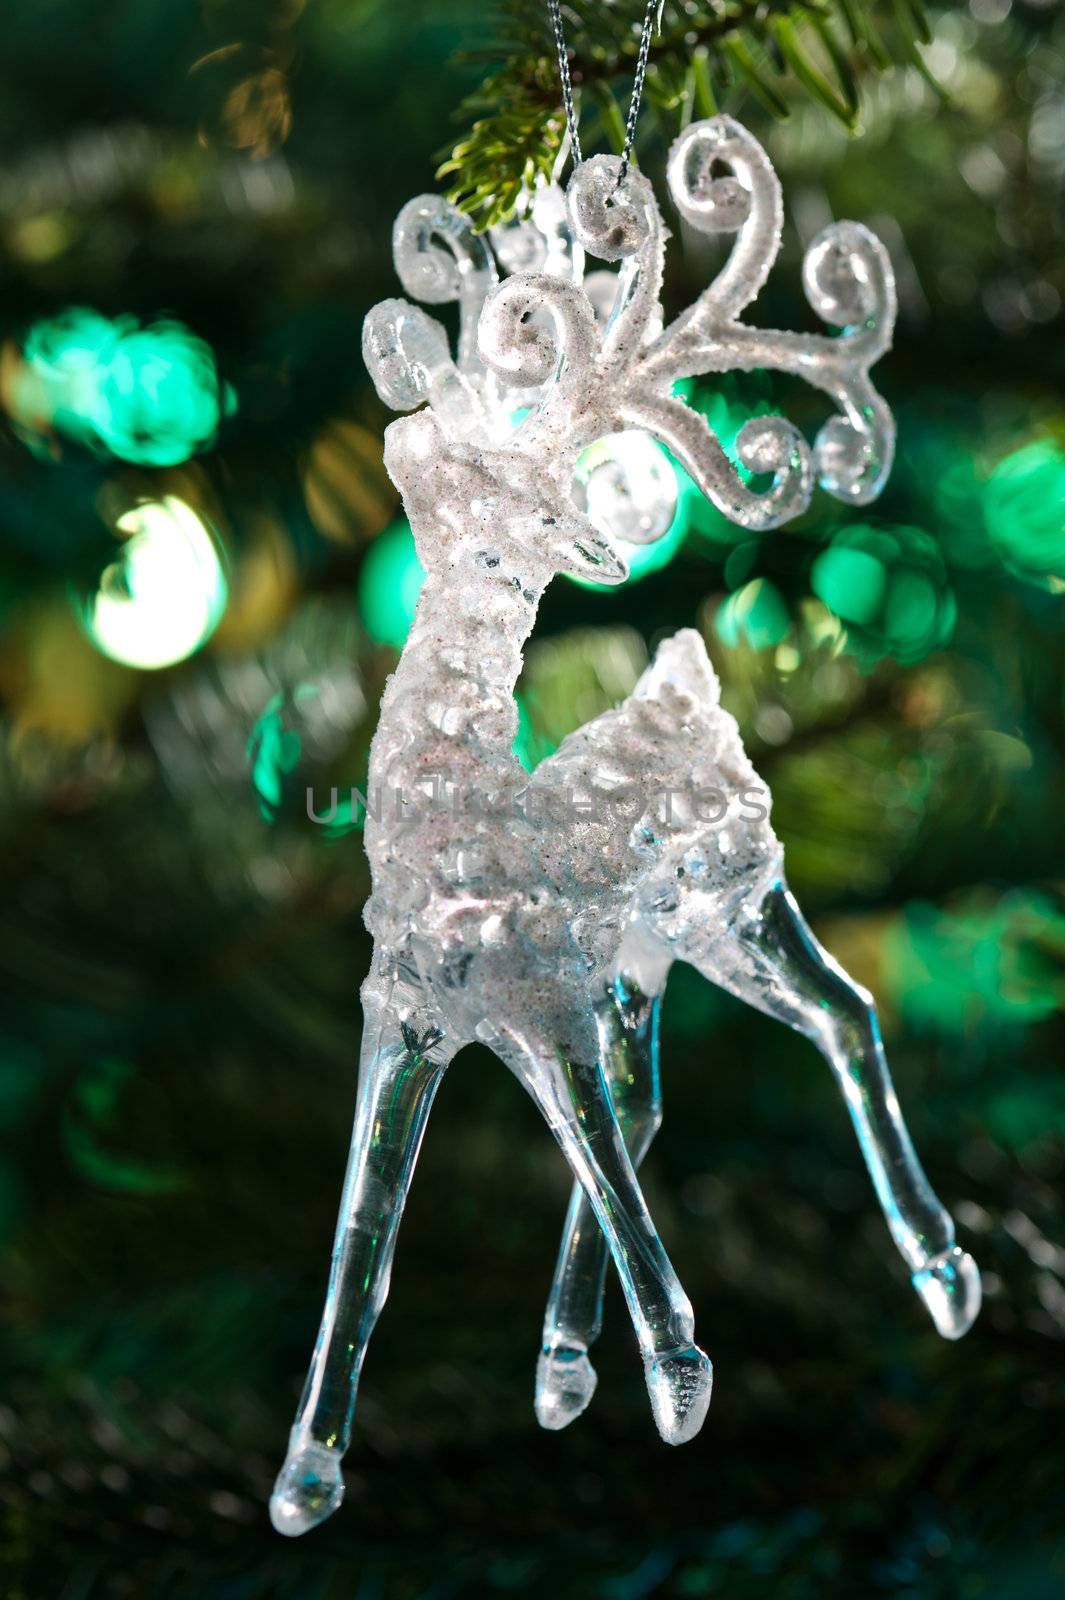 Decorative Chrystal moose shape ornament in a Christmas tree 